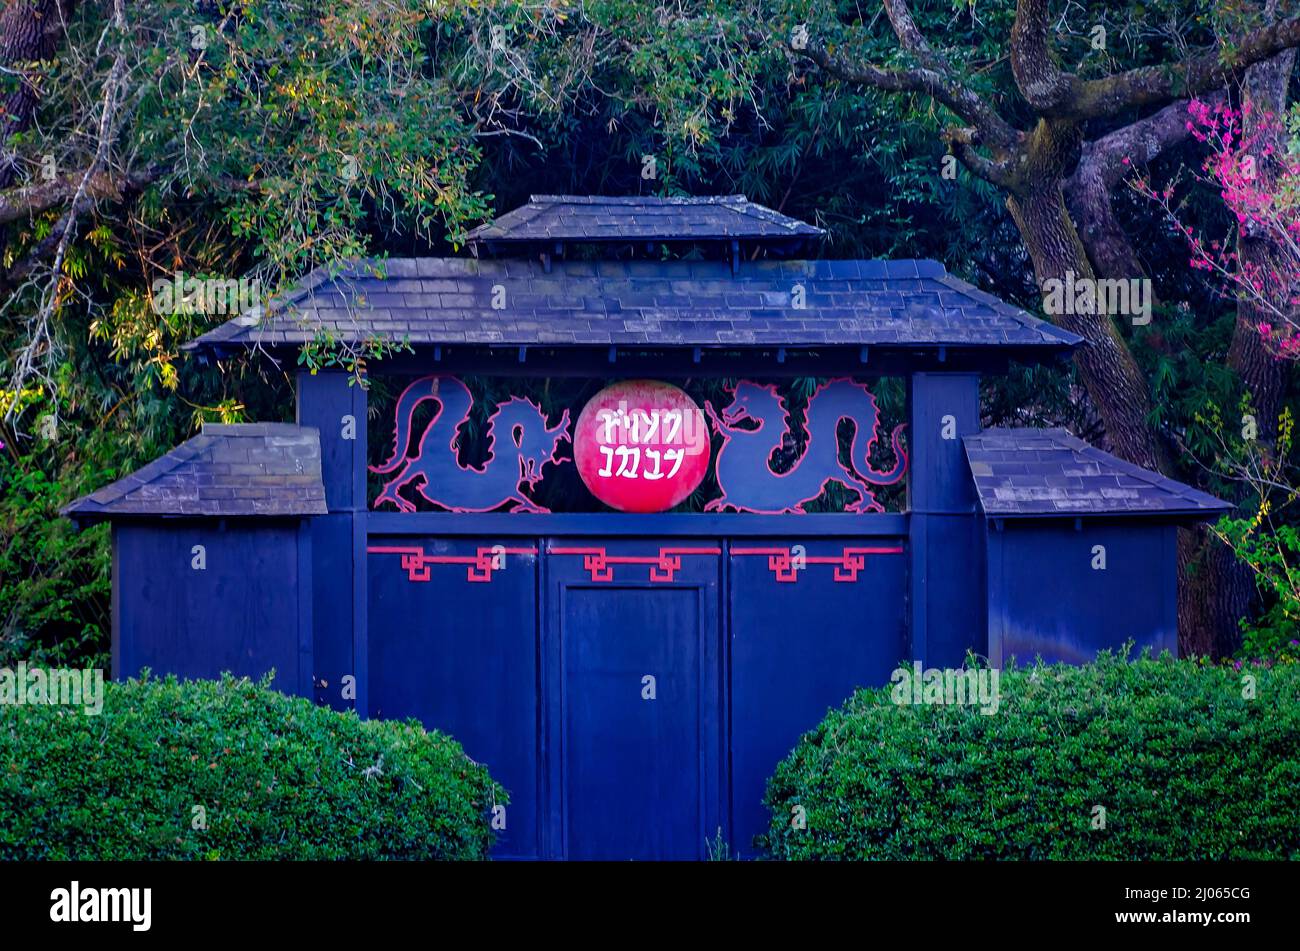 An Oriental building features dragons and a Japanese sign reading “Drink Coca-Cola” in the Asian-American Garden at Bellingrath Gardens in Mobile, Ala. Stock Photo